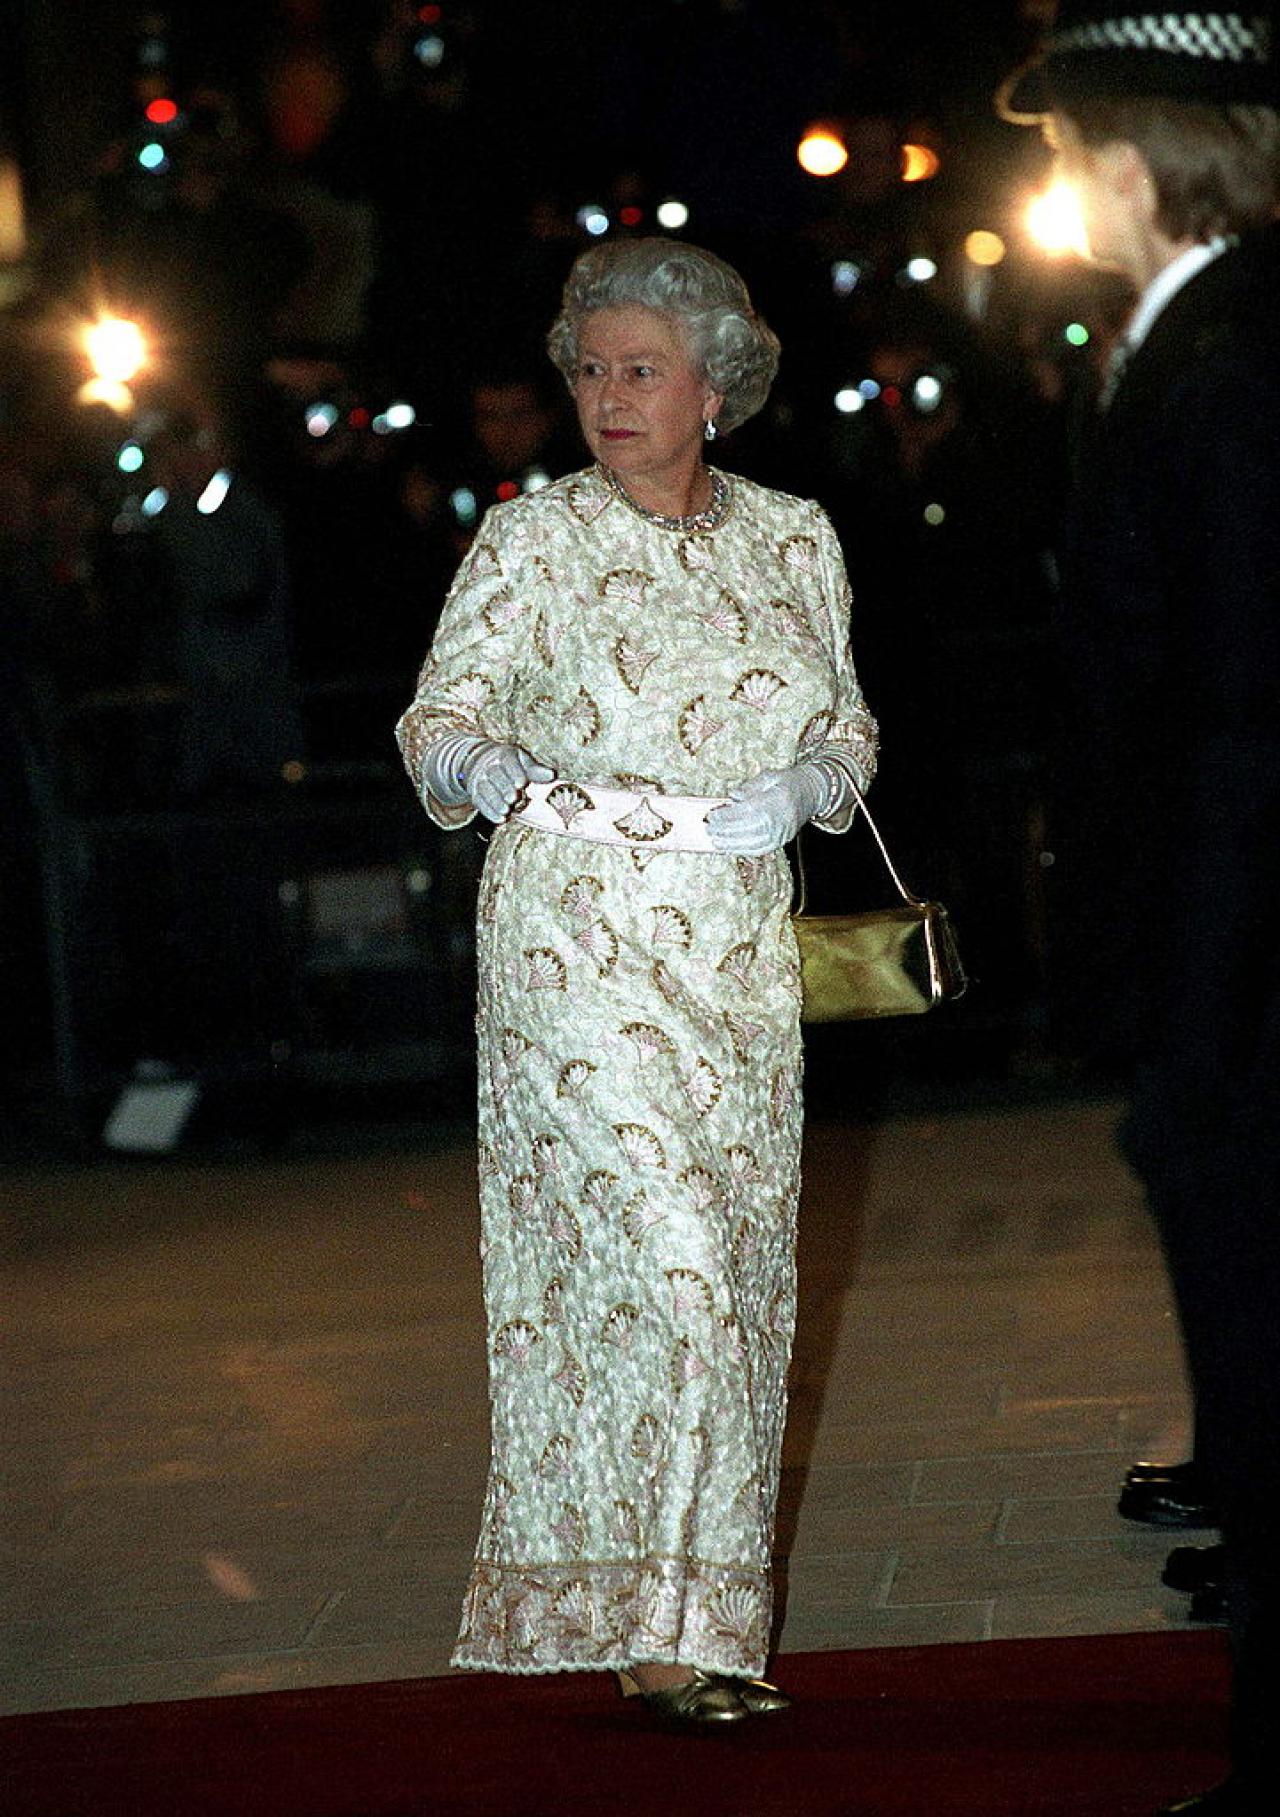 LONDON, UNITED KINGDOM - DECEMBER 01:  The Queen Arriving At The Re-opening Of The Royal Opera House In Covent Garden, London.  (Photo by Tim Graham Photo Library via Getty Images)